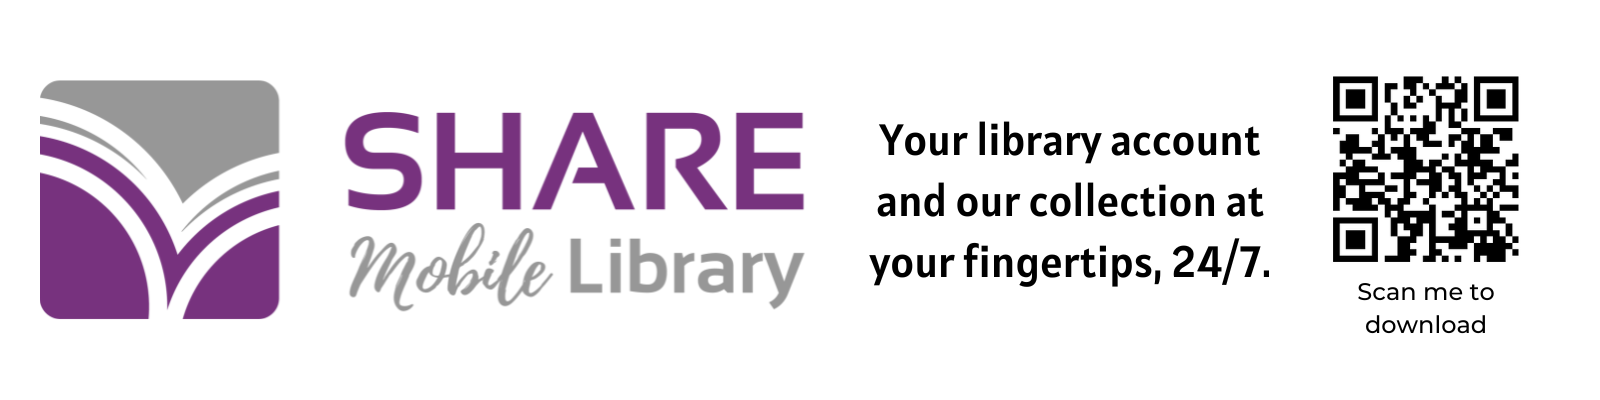 A white banner with the purple and grey SHARE Mobile Library logo, a QR code that says "Scan me to download", and "Your library account and our collection at your fingertips, 24/7."